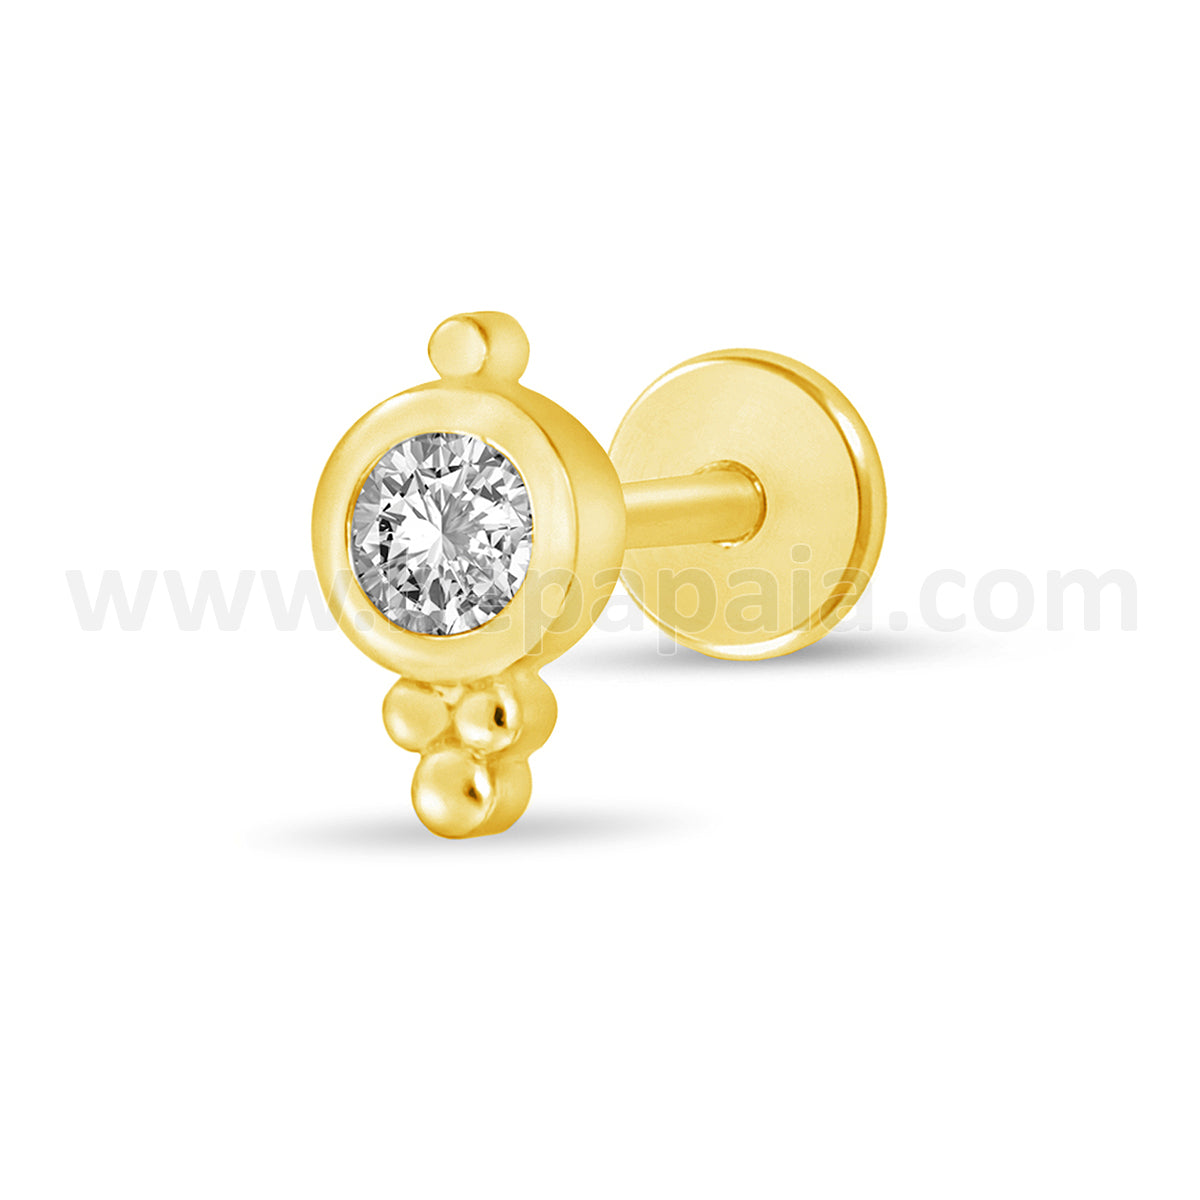 Gold steel tragus ethnic designs with gems